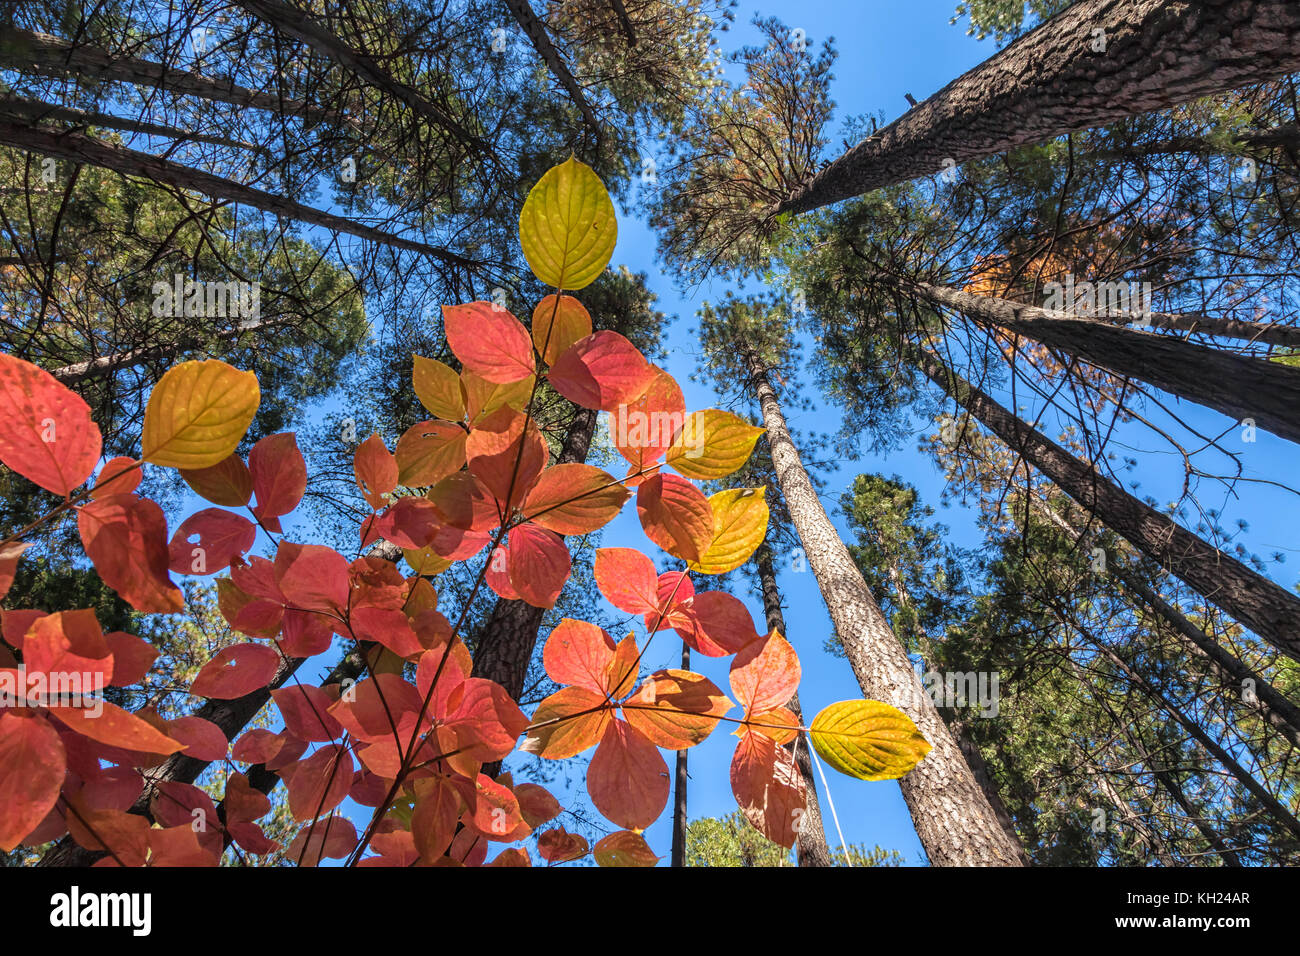 Pacific dogwood leaves in autumnal foliage with ponderosa pines, at low camera angle looking up, Yosemite National Park, California, United States. Stock Photo